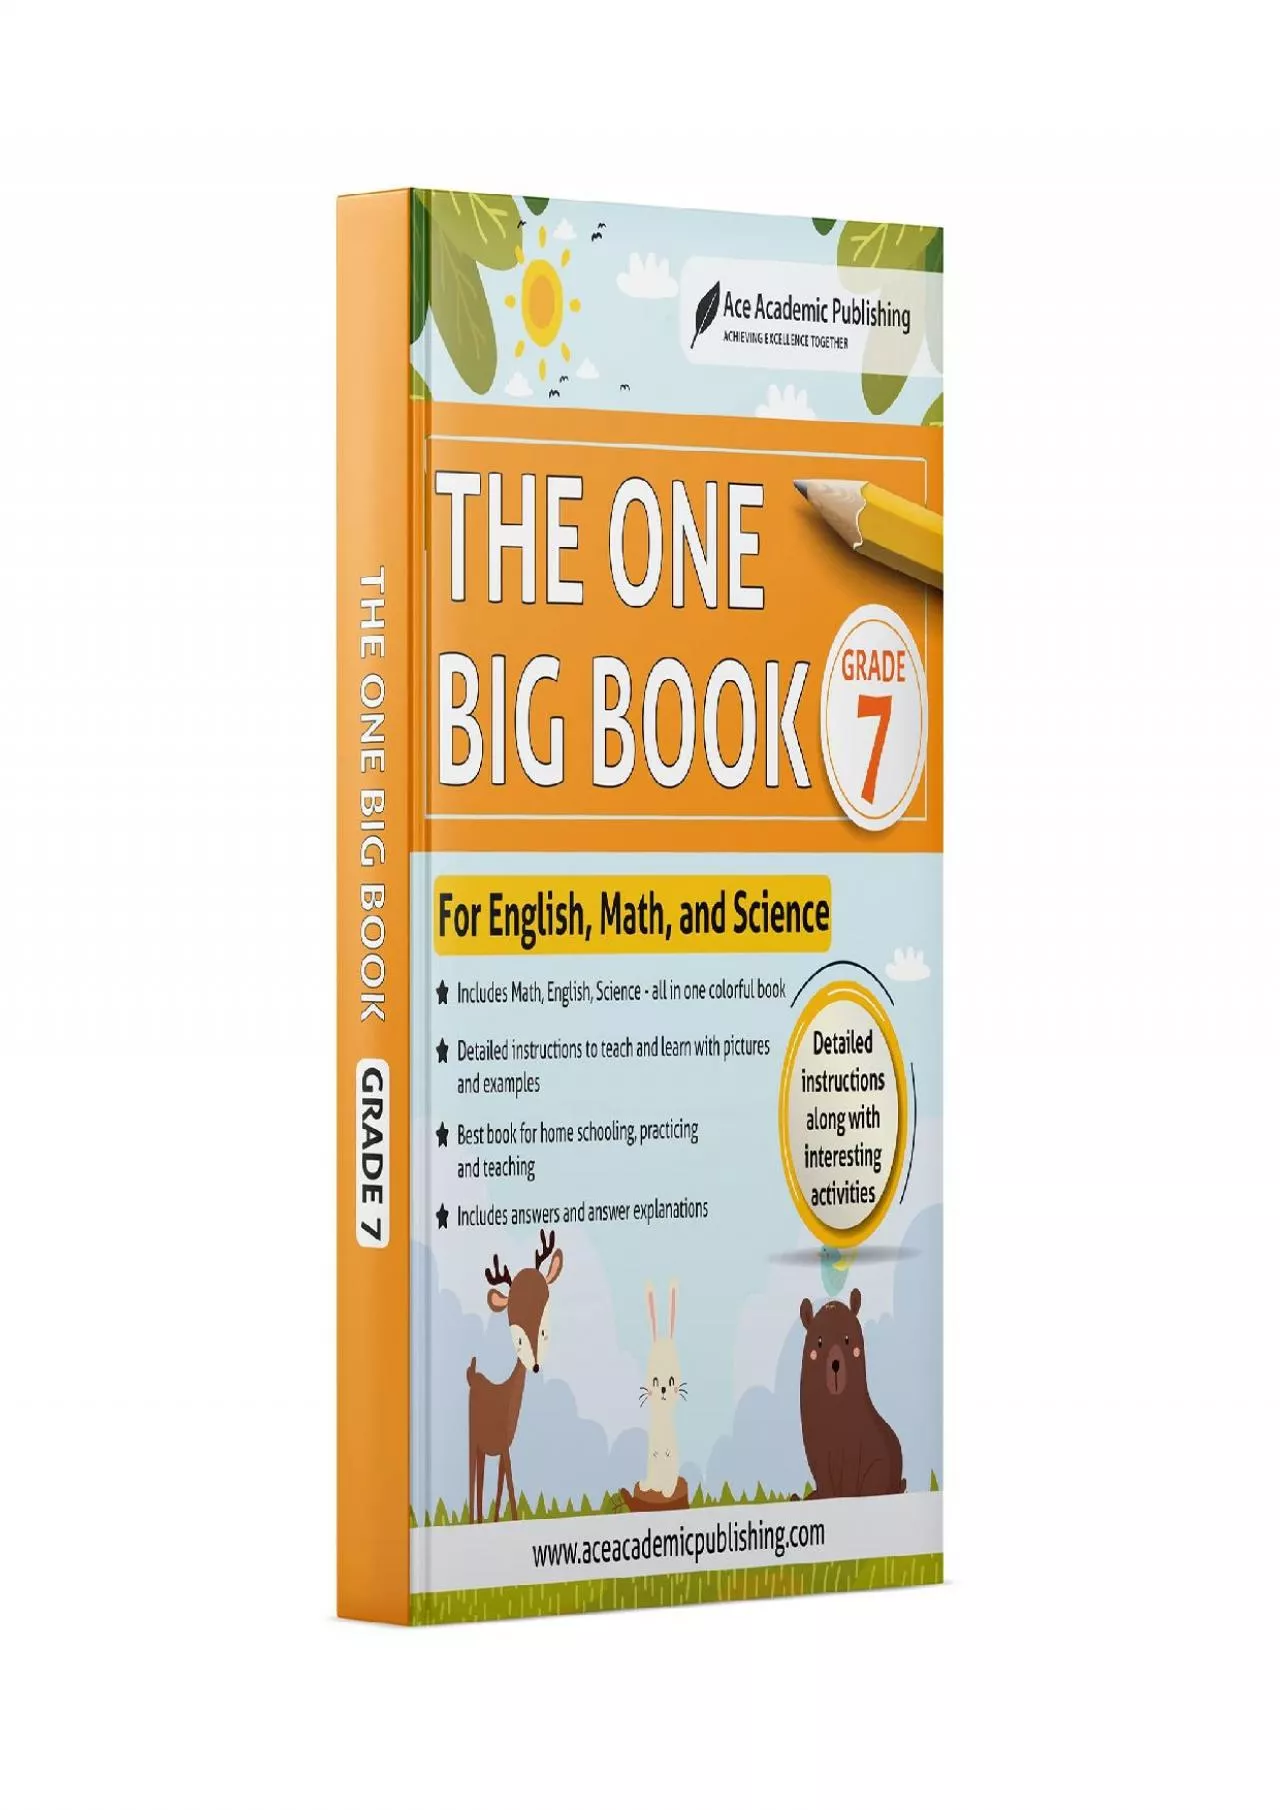 [EBOOK] The One Big Book - Grade 7: For English Math and Science